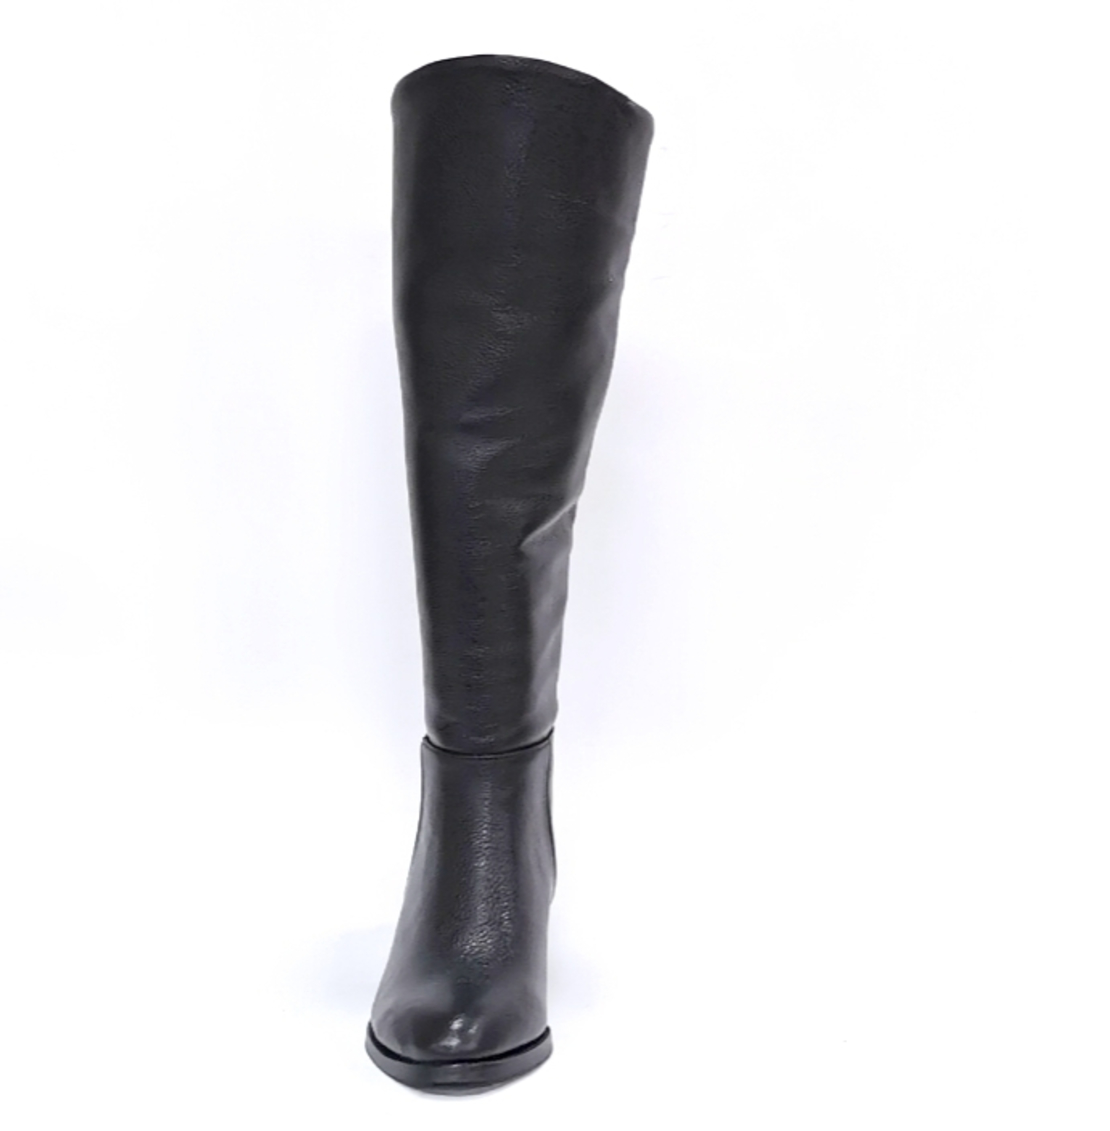 Women's elegant boots made of natural leather in black/73291